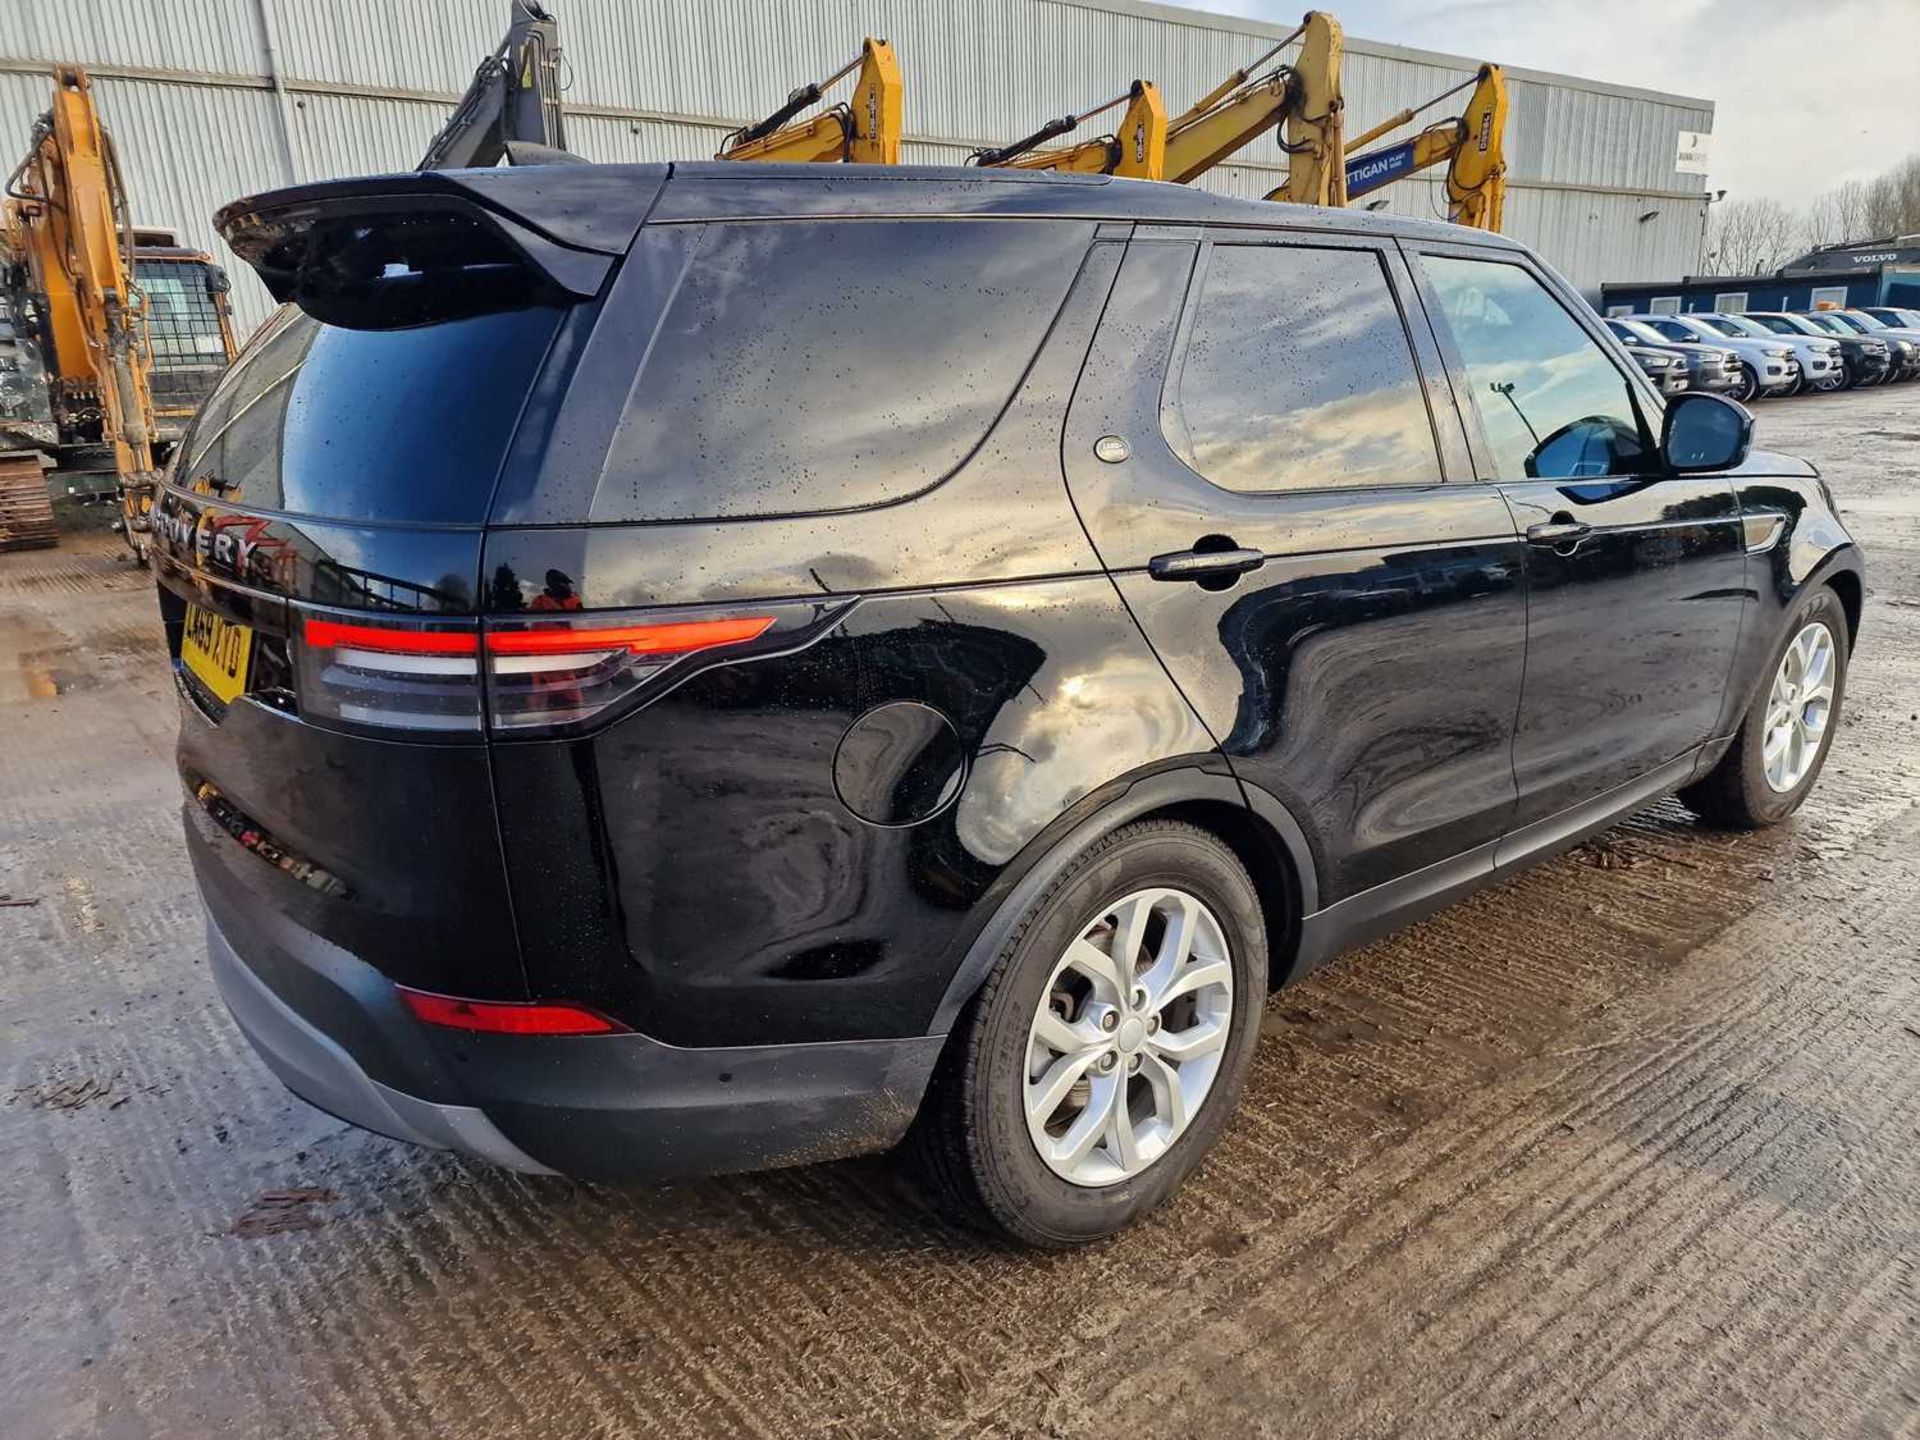 2019 Landrover Discovery SD4 SE 240 Commercial, Auto, Paddle Shift, Sat Nav, Reverse Camera, Parking - Image 5 of 26